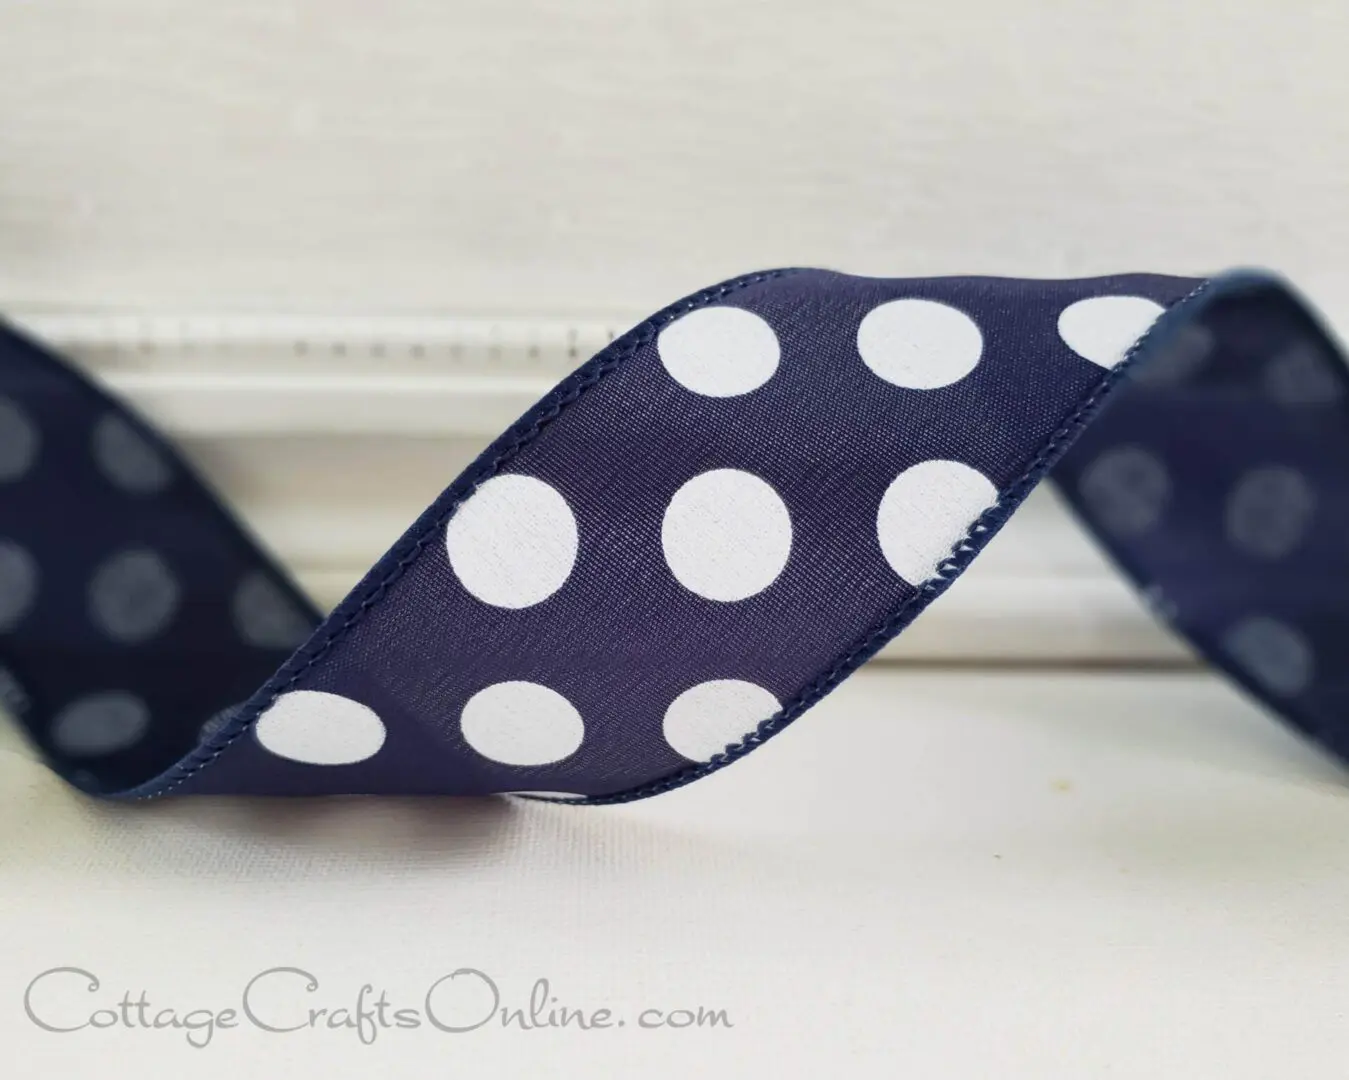 Big white dots on navy blue 1.5" wide wired ribbon from the Etsy shop of Cottage Crafts Online.